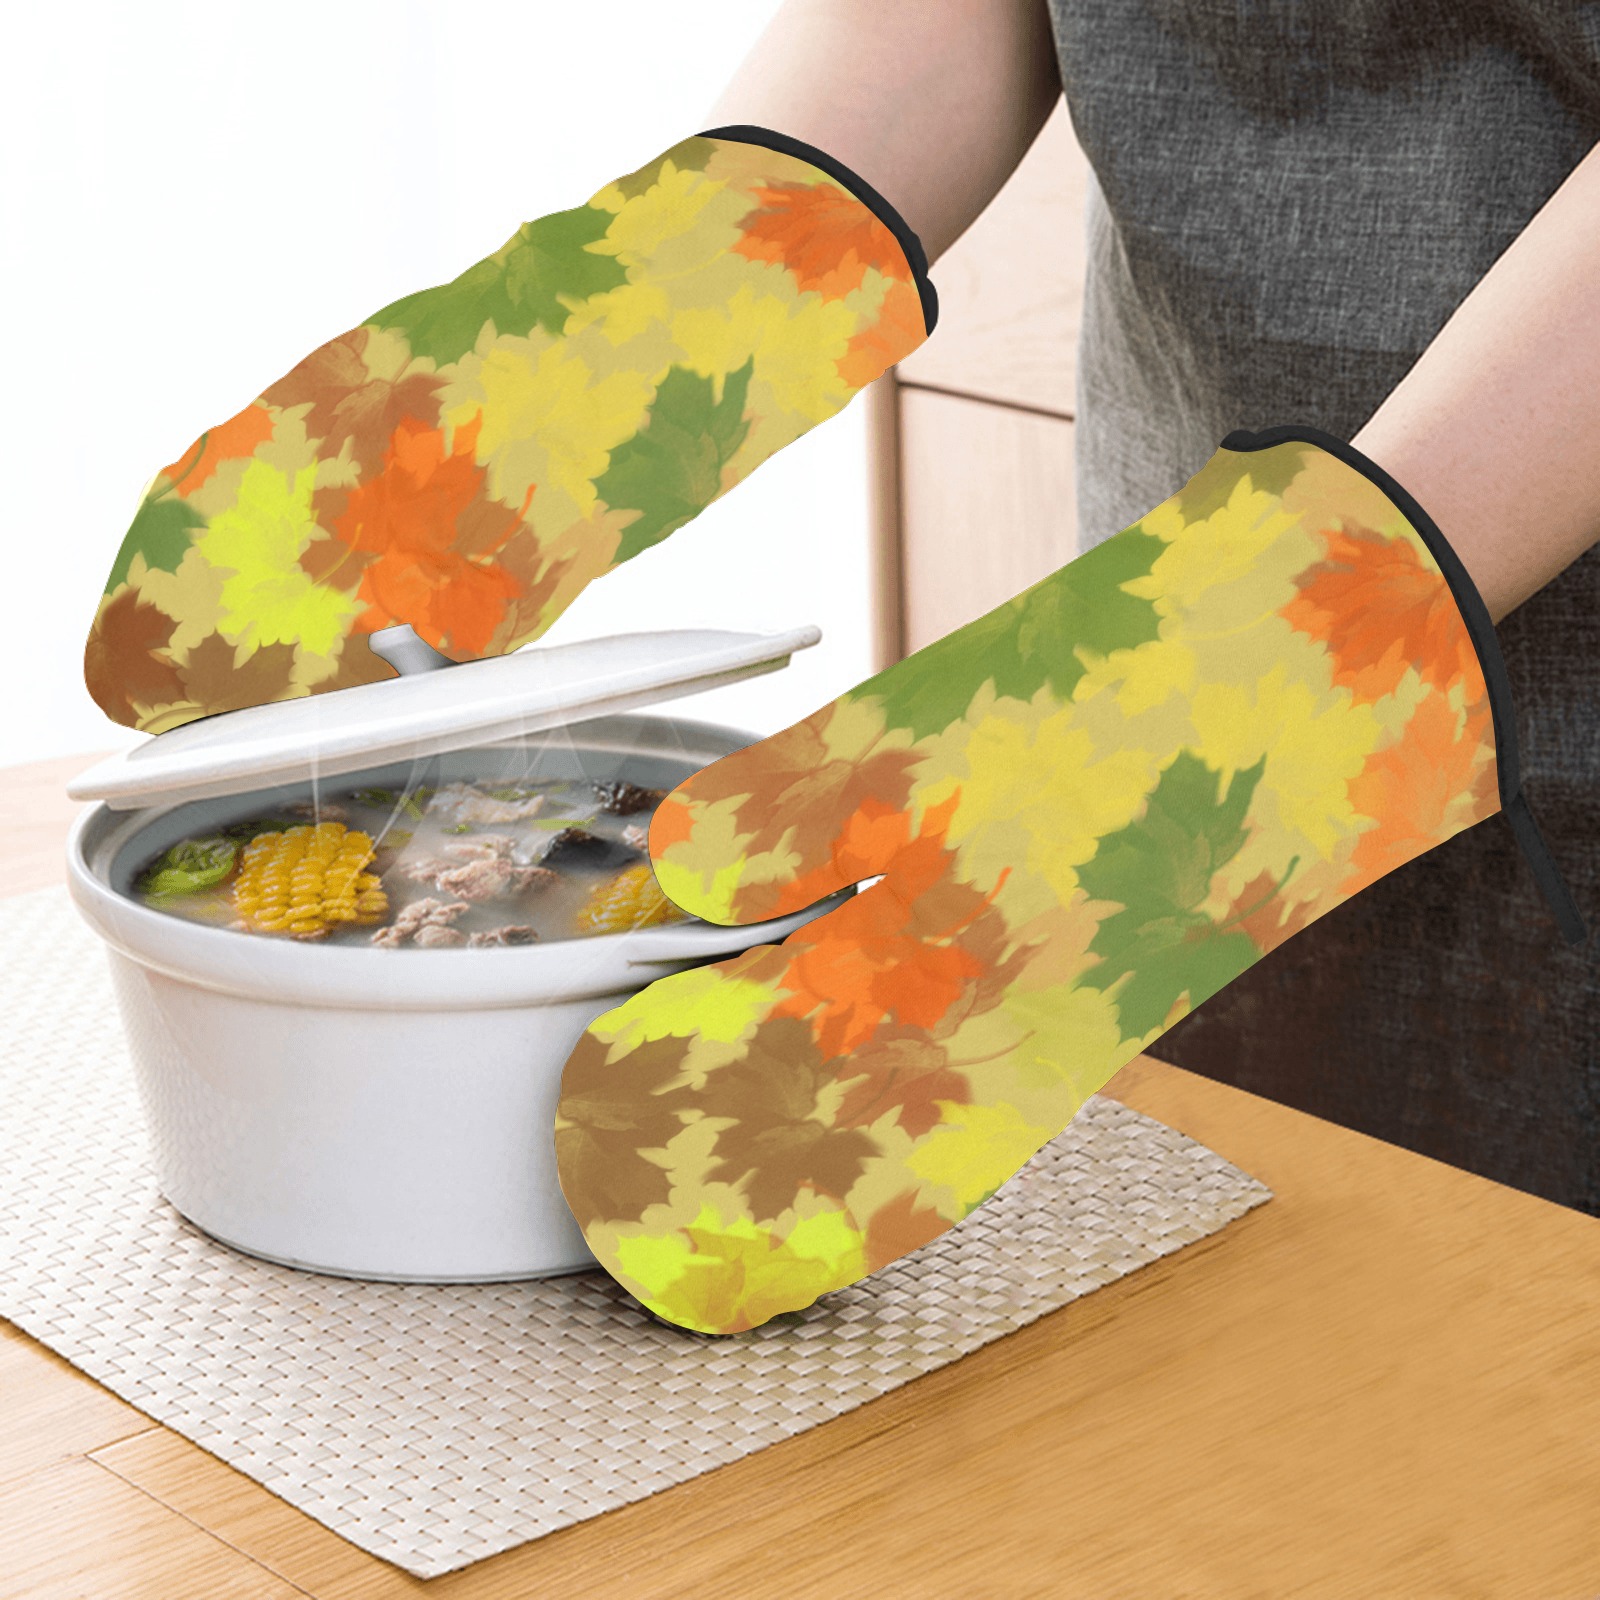 Autumn Leaves / Fall Leaves Oven Mitt (Two Pieces)